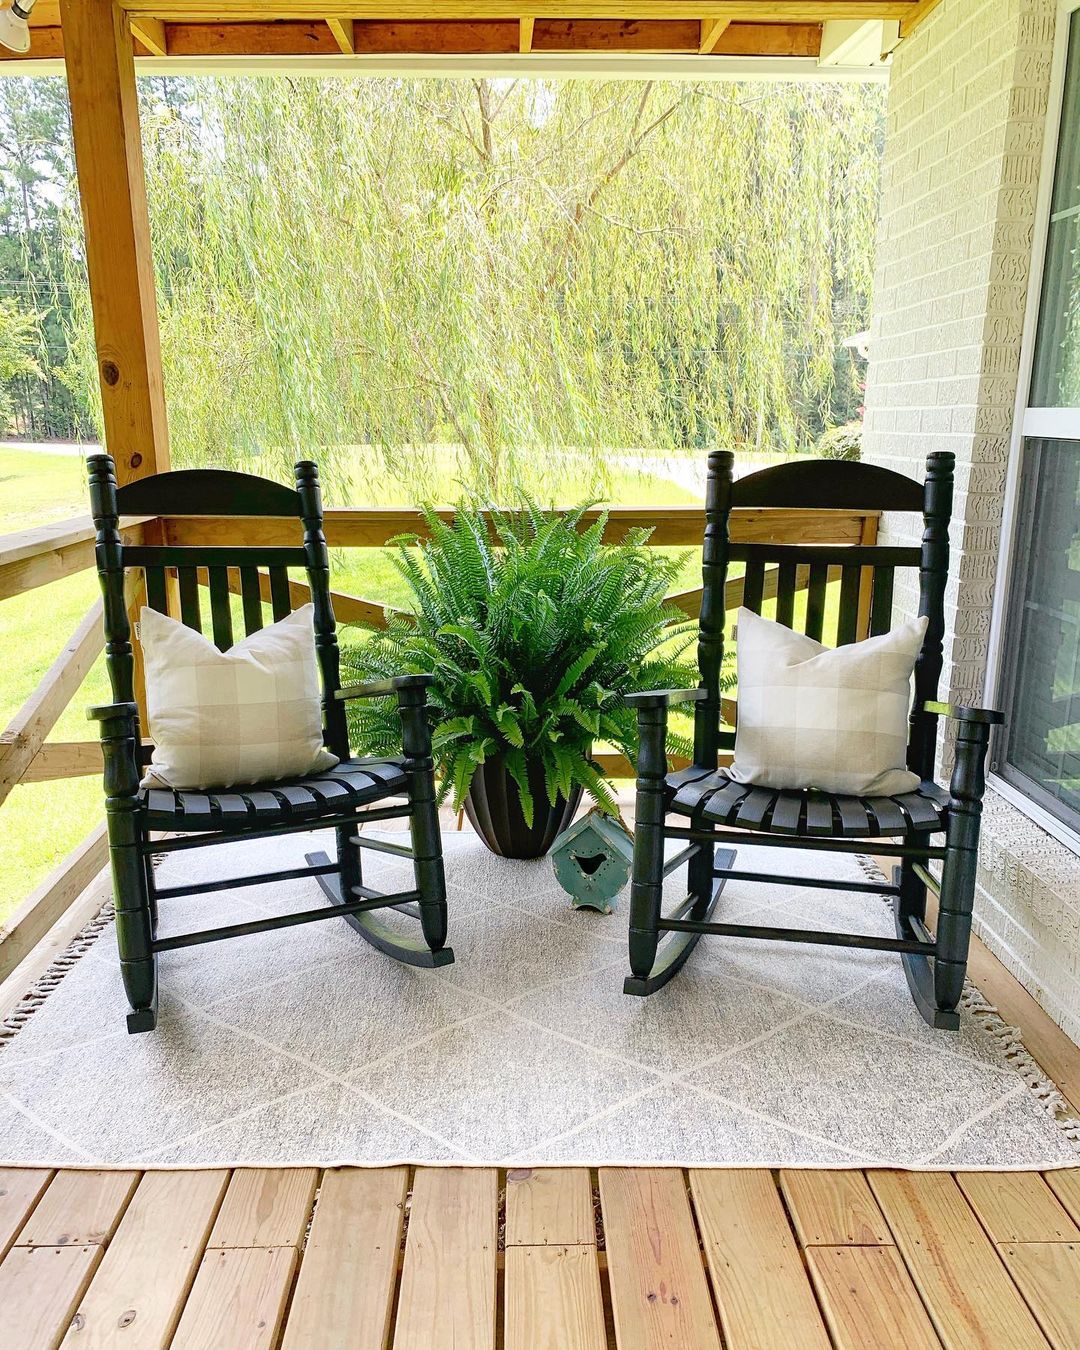 Updated Black Rocking Chairs with White Pillows. Photo by Instagram user @southern_styleandhome